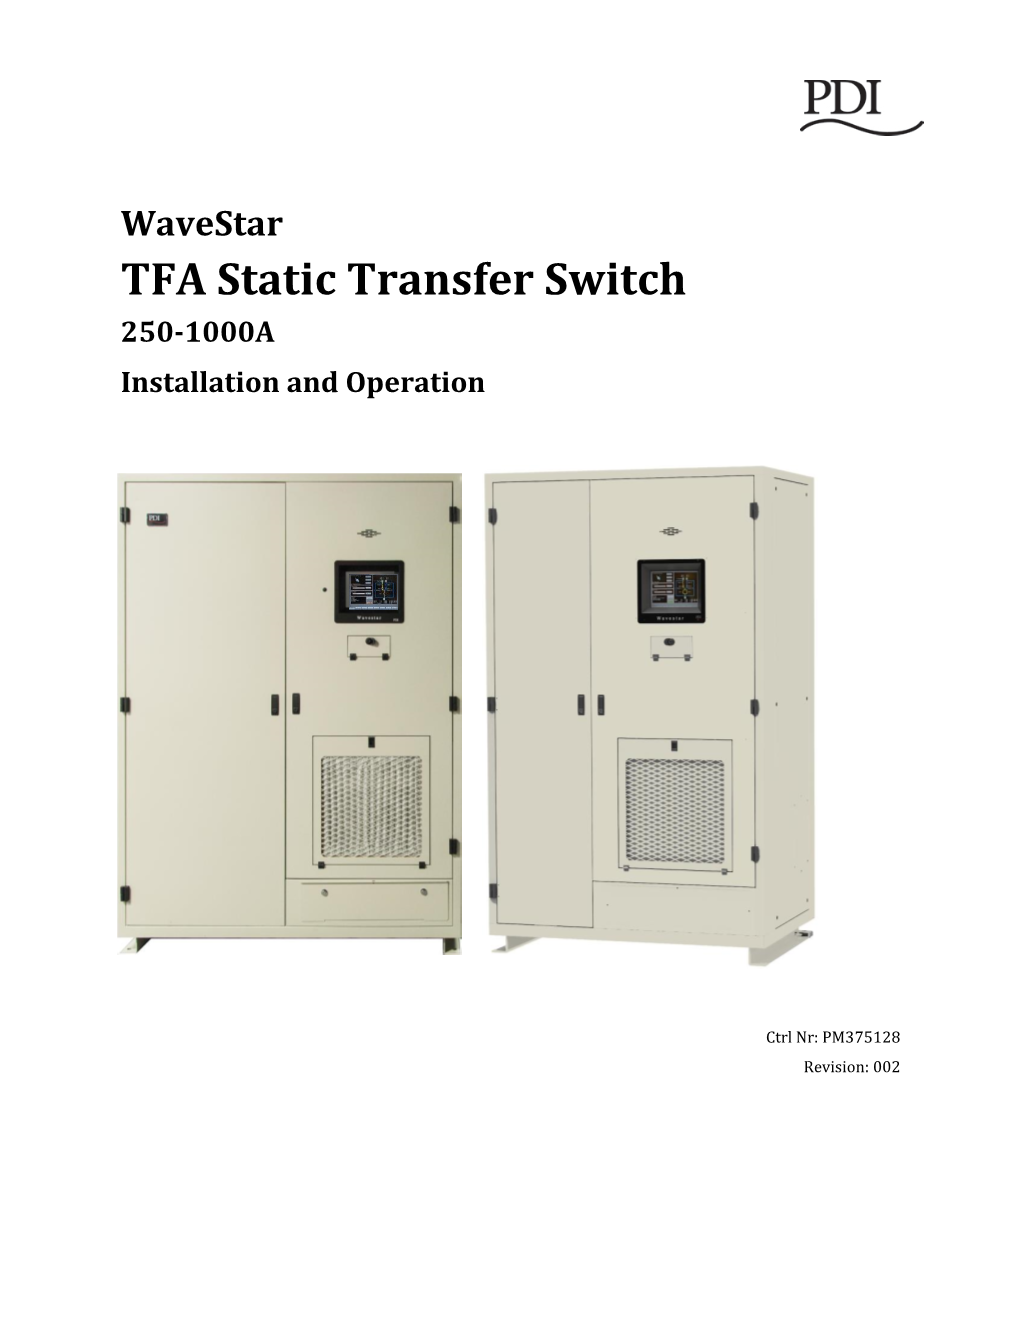 TFA Static Transfer Switch 250-1000A Installation and Operation